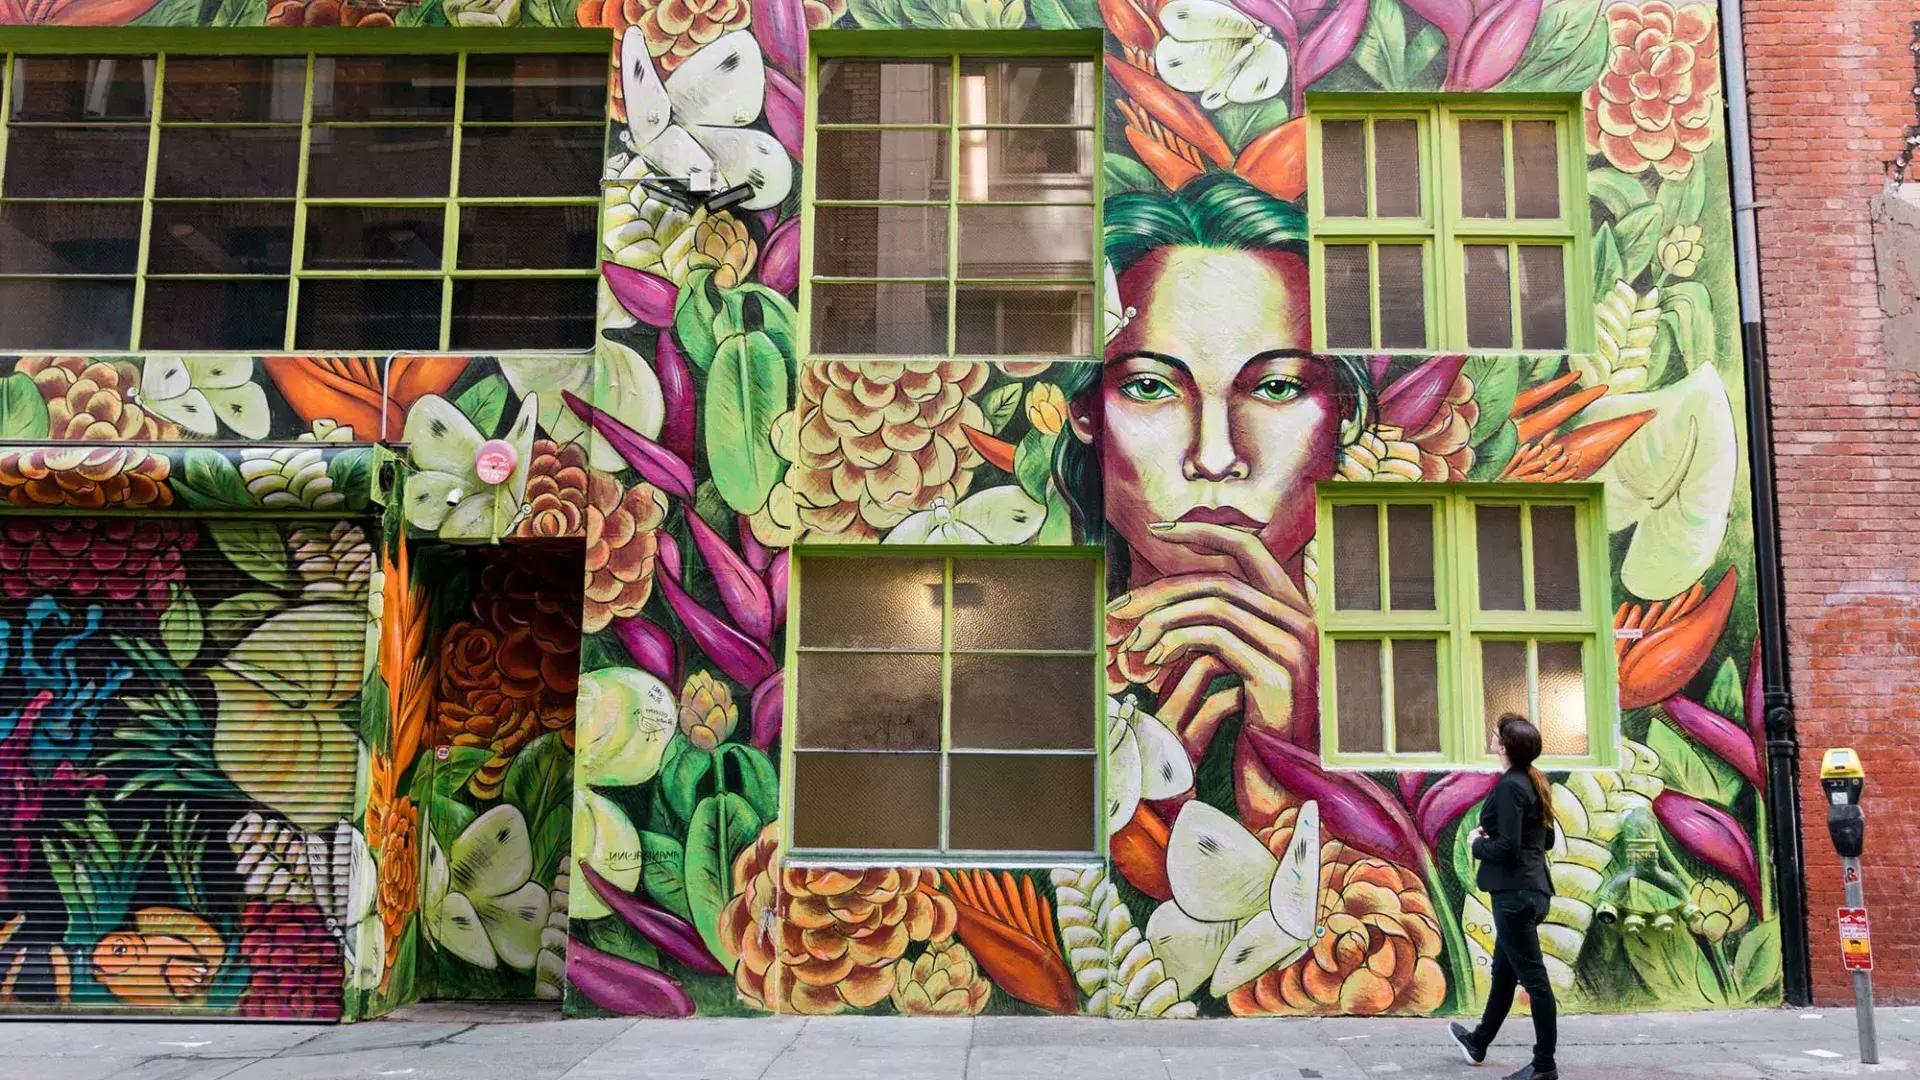 A woman looks up at a brightly colored mural on the side of a brick building in San Francisco.